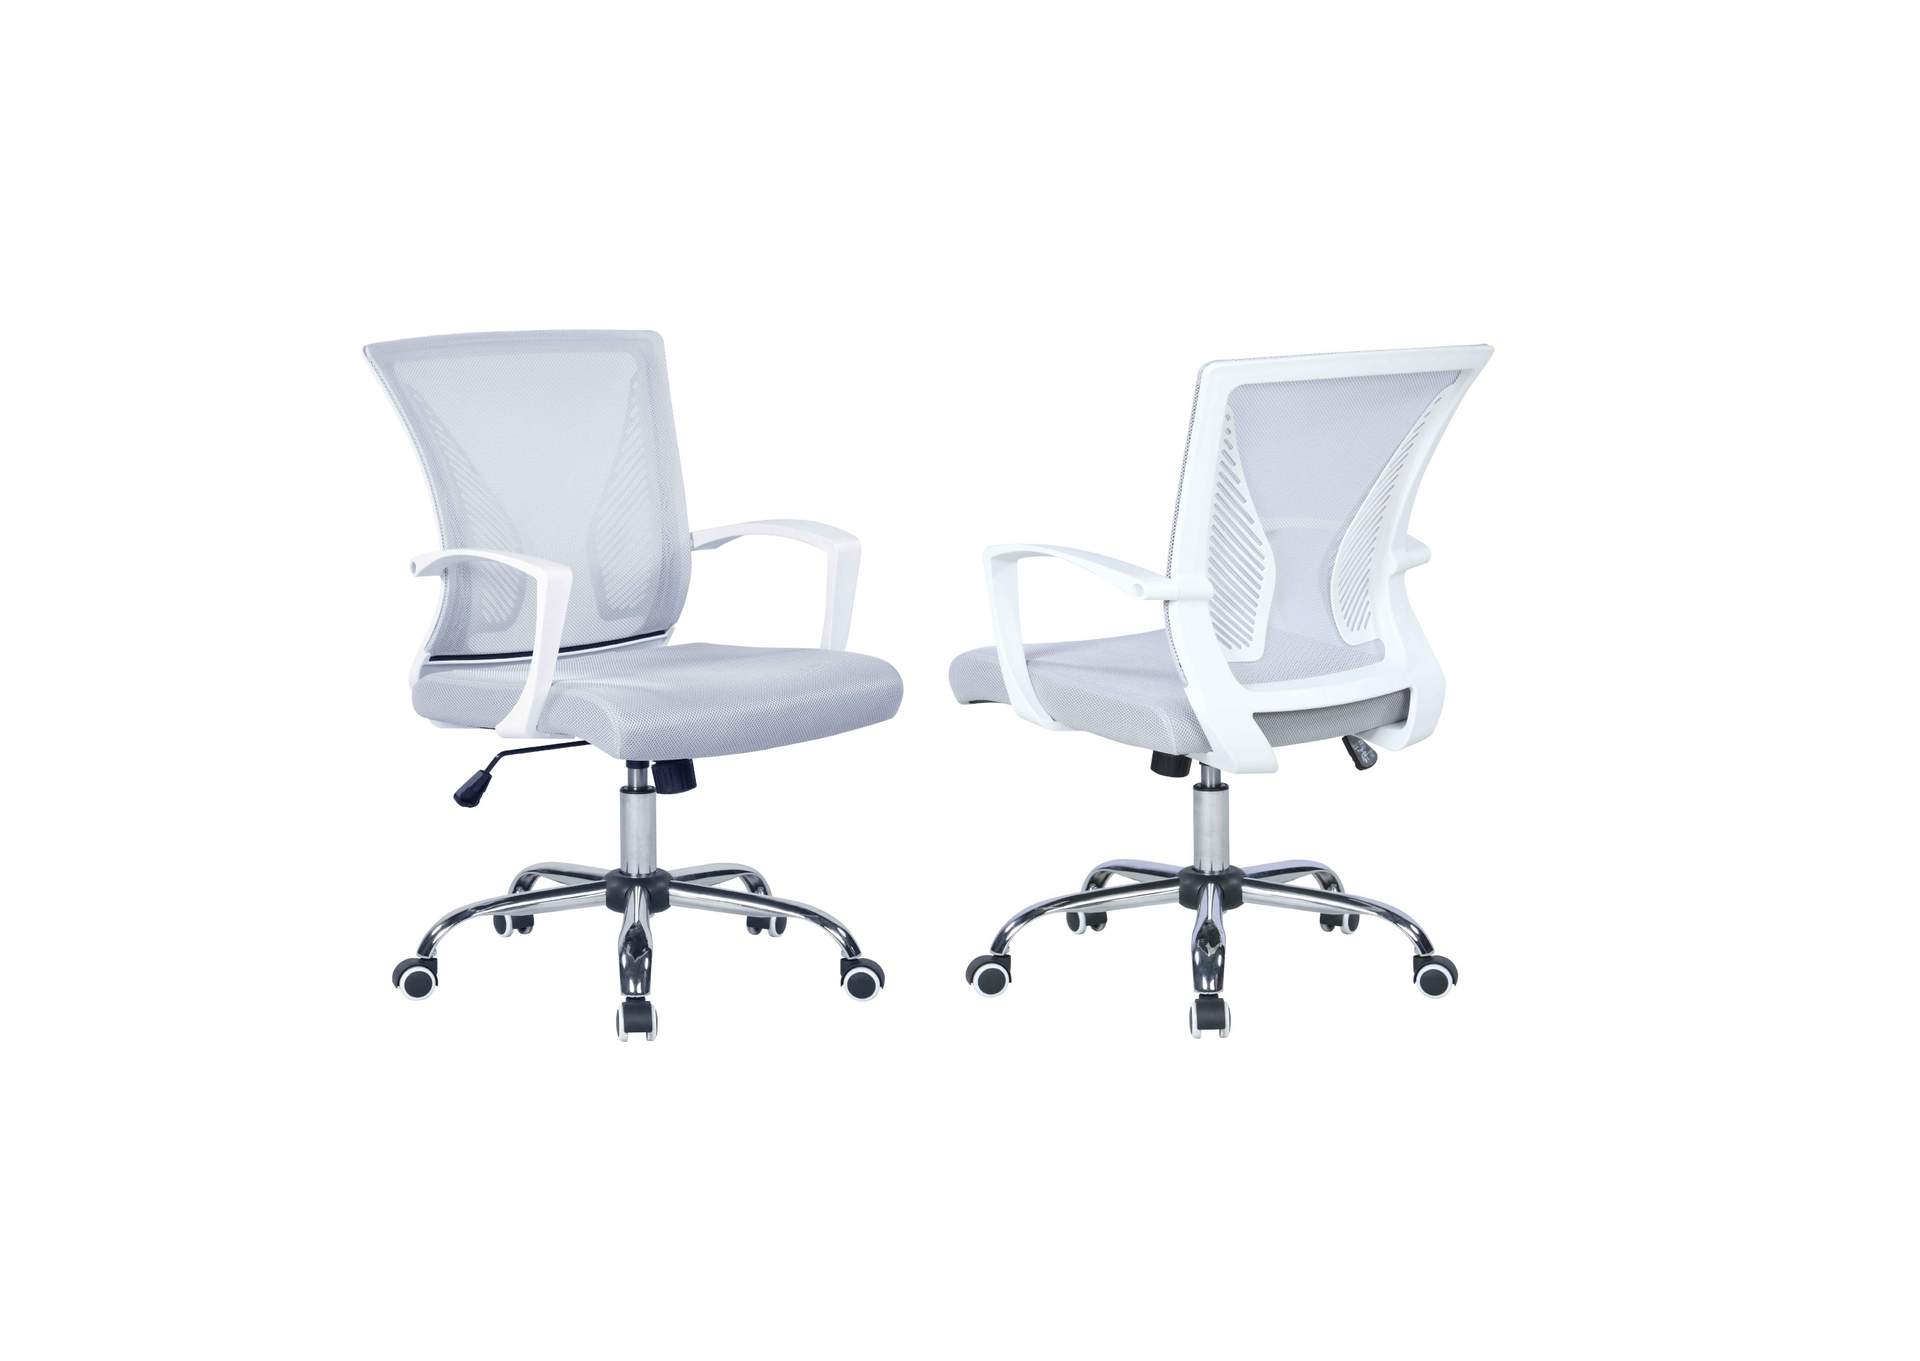 Contemporary Pneumatic Adjustable-Height Computer Chair,Chintaly Imports